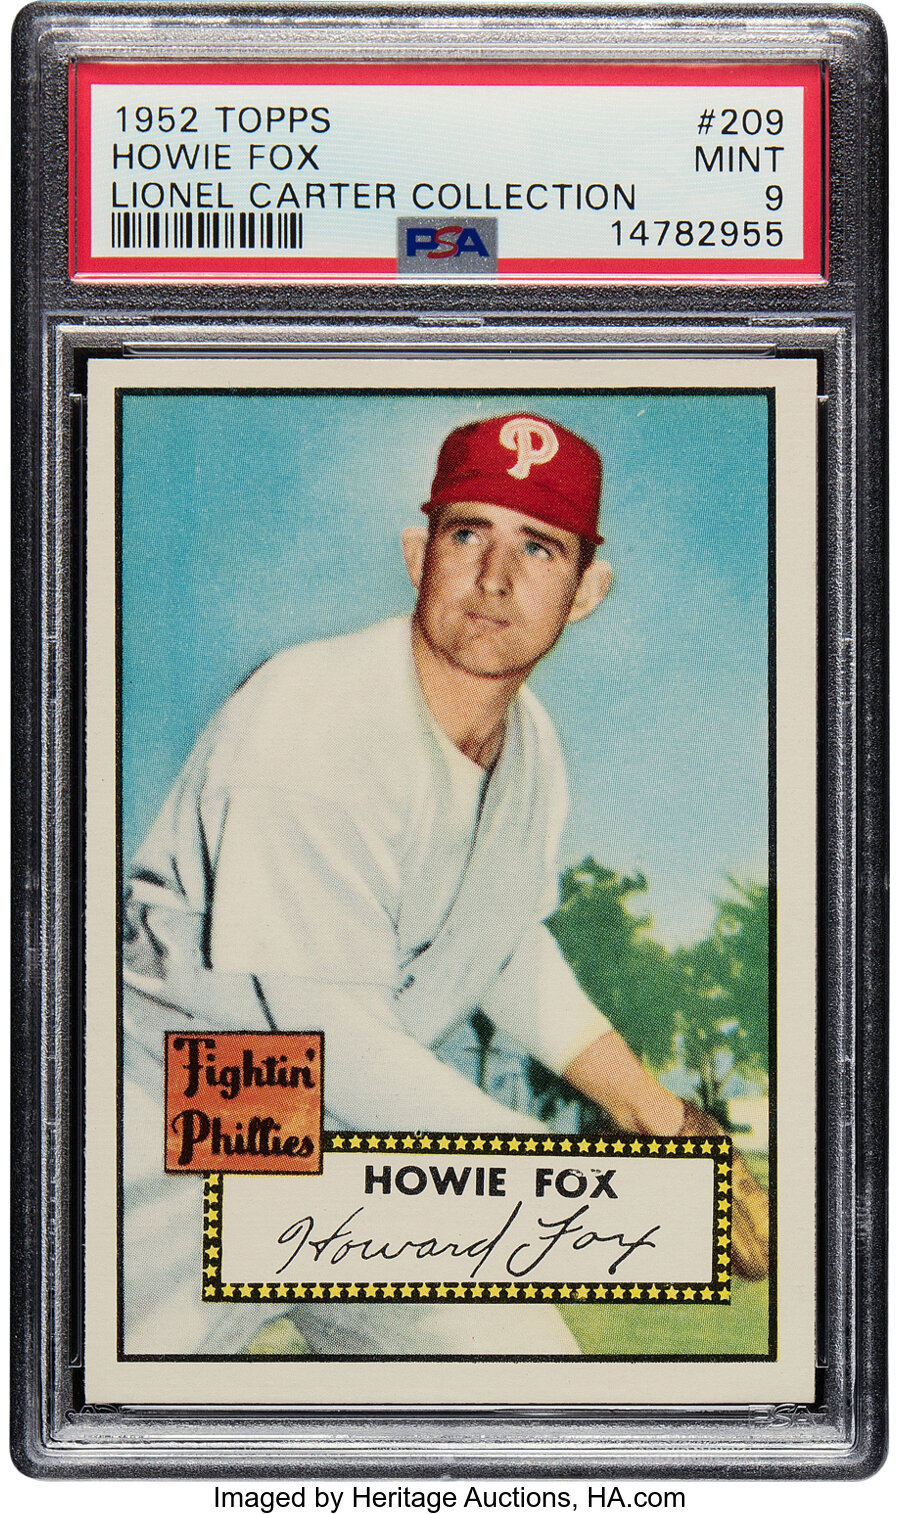 1952 Topps Howie Fox #209 PSA Mint 9 - Pop Six, None Superior! From the Lionel Carter Collection